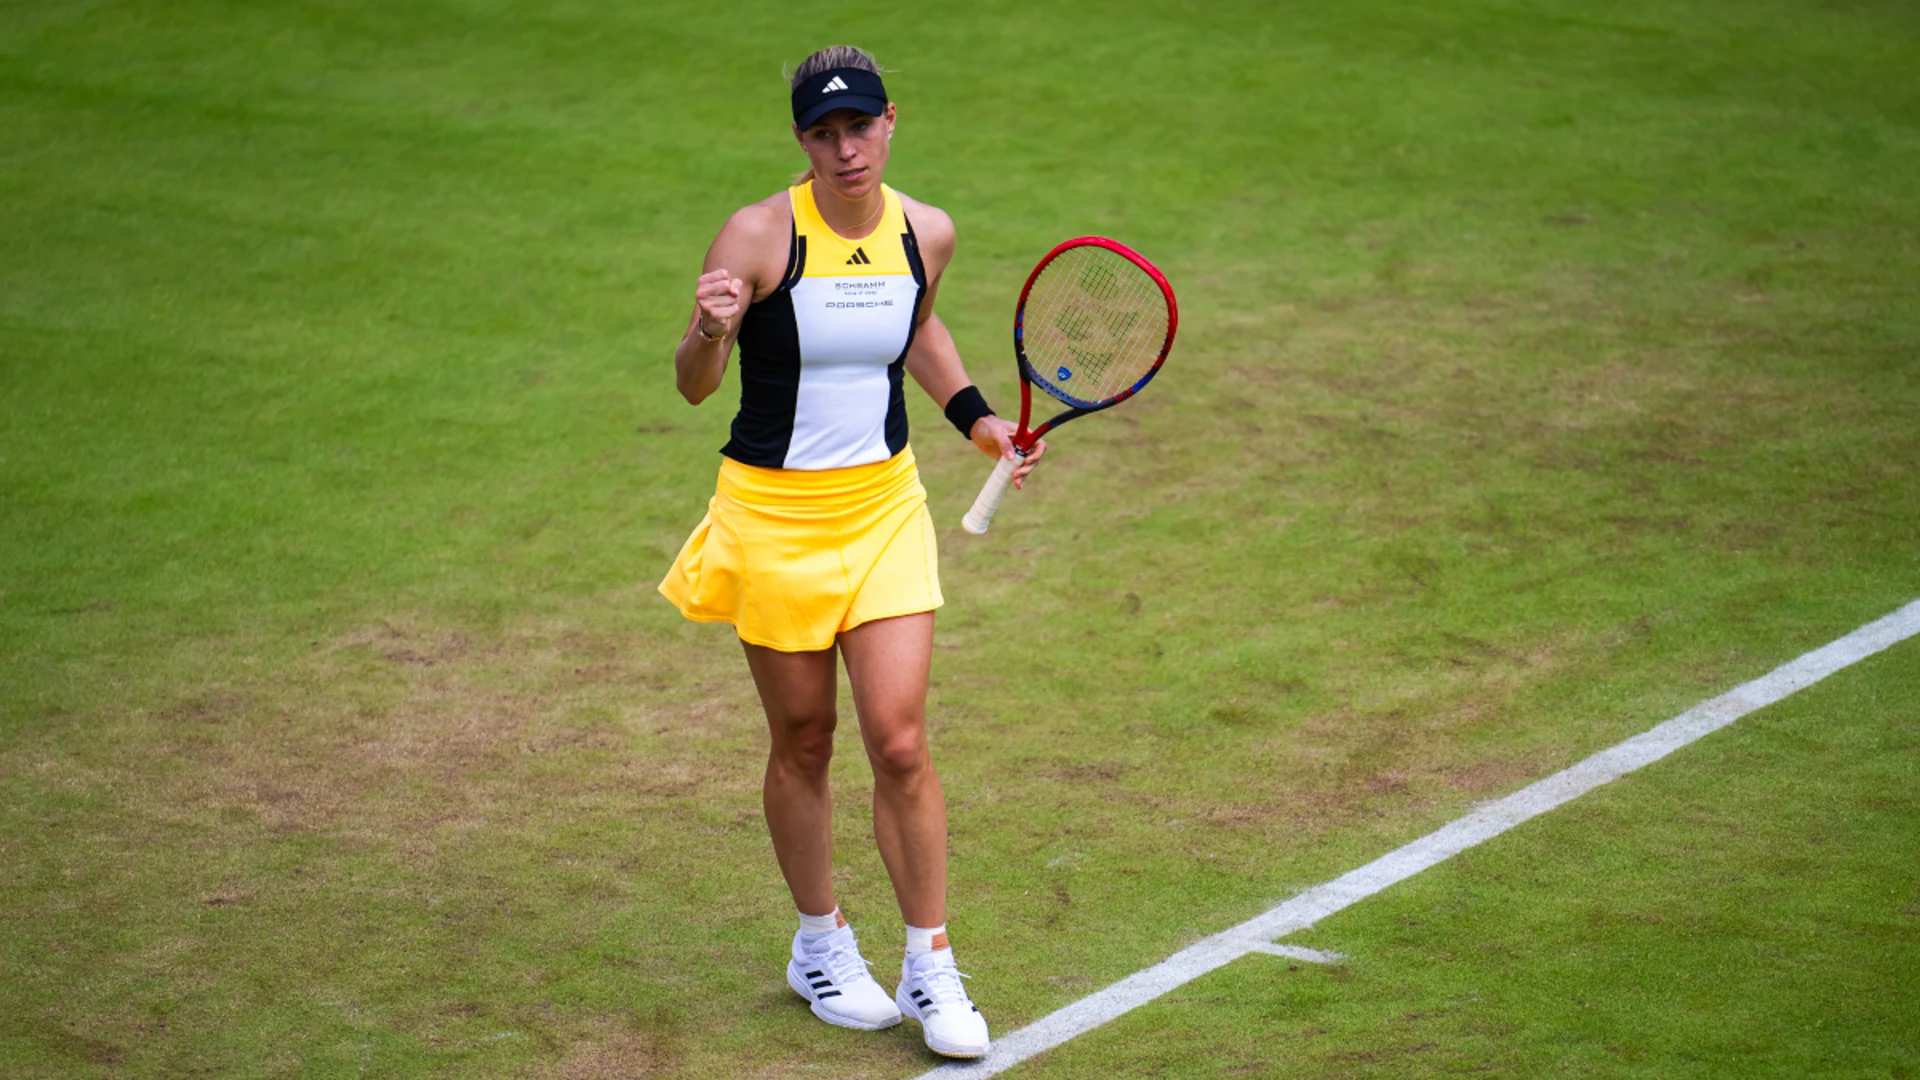 Germany's Kerber to retire after Paris Games